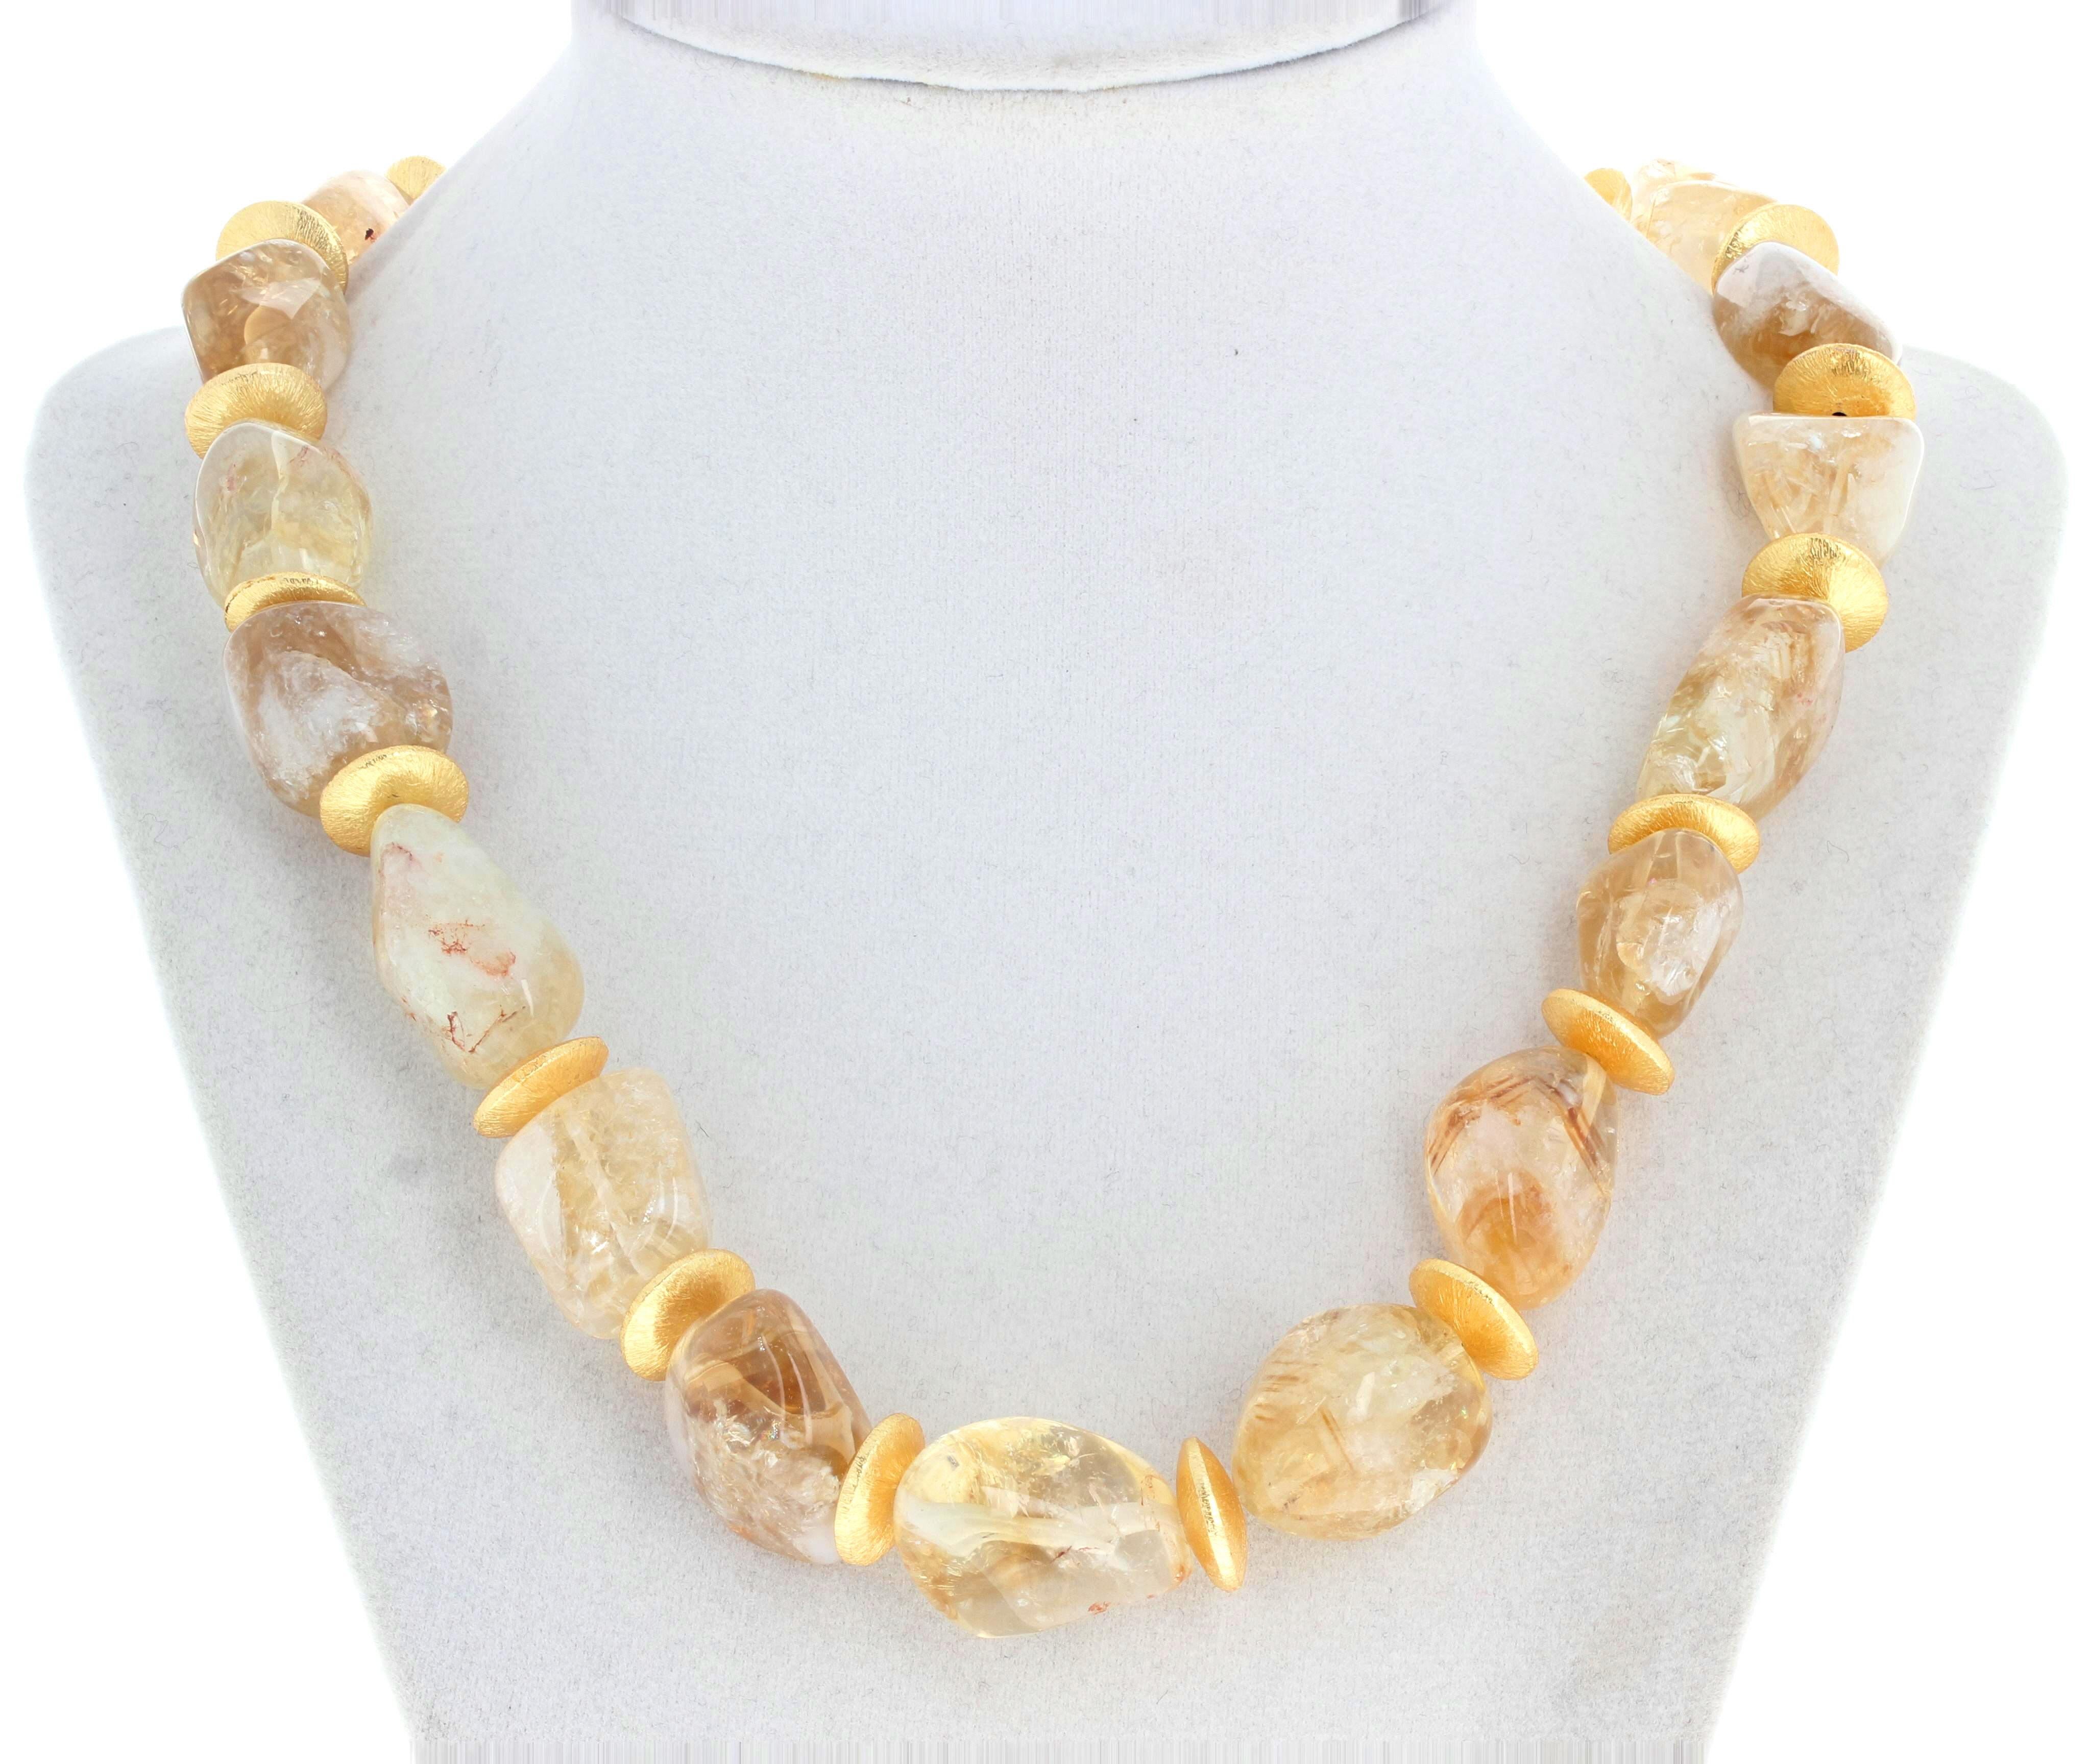 These highly polished translucent natural goldy real Citrines (largest approximately 28mm x 16mm glitter and glow brilliantly around your neck.  They are enhanced with large gold plated 12mm rondels that also glow profusely.  The clasp is an easy to